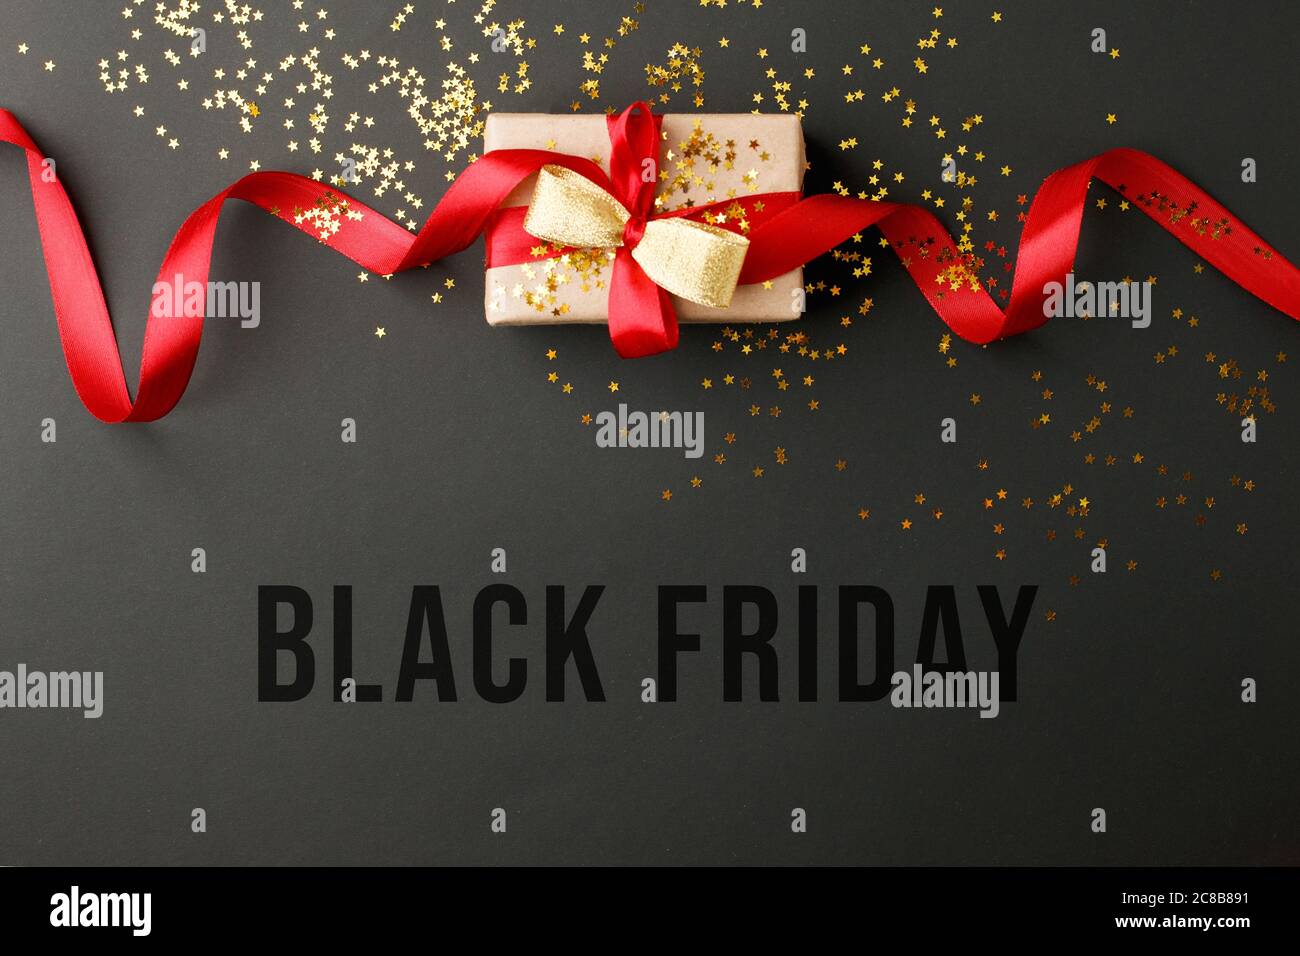 BLACK FRIDAY HOLIDAY SALE Craft gift box on a dark background, decorated with a bow, romantic luxury atmosphere. For seasonal shopping sales, consumer Stock Photo